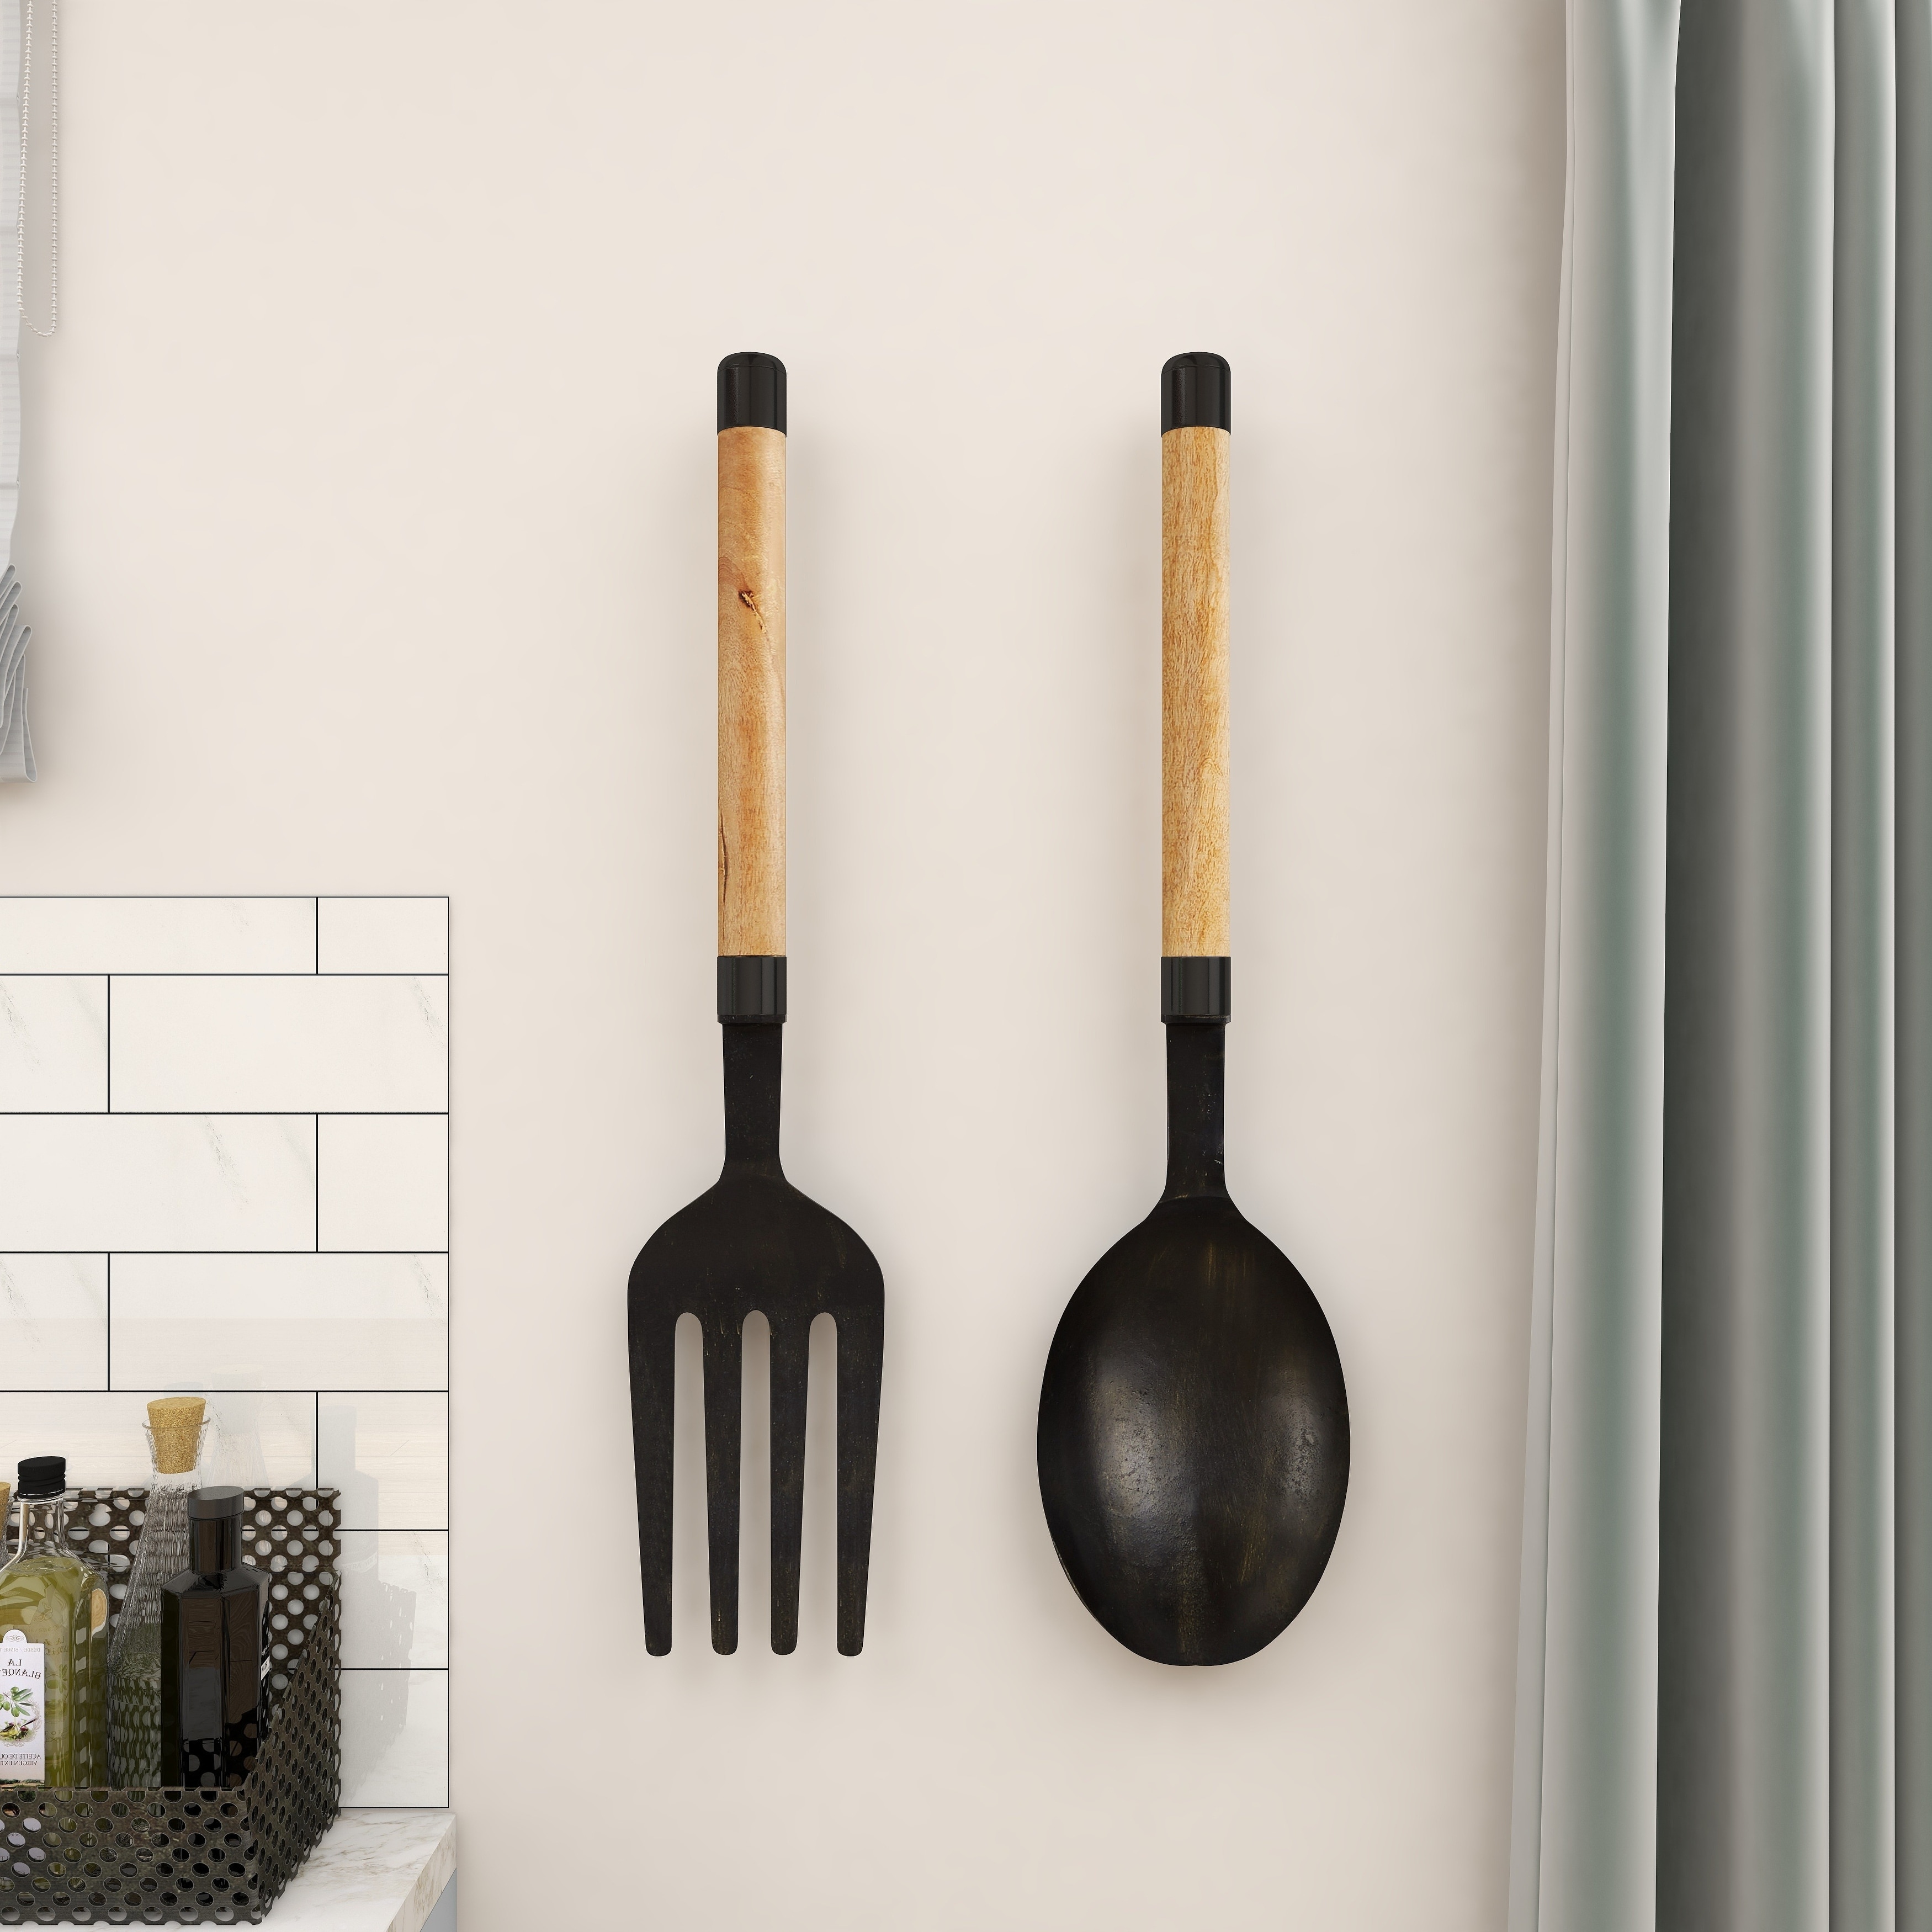 Kitchen Utensils Wall Decor with Metal Outlines - Bed Bath